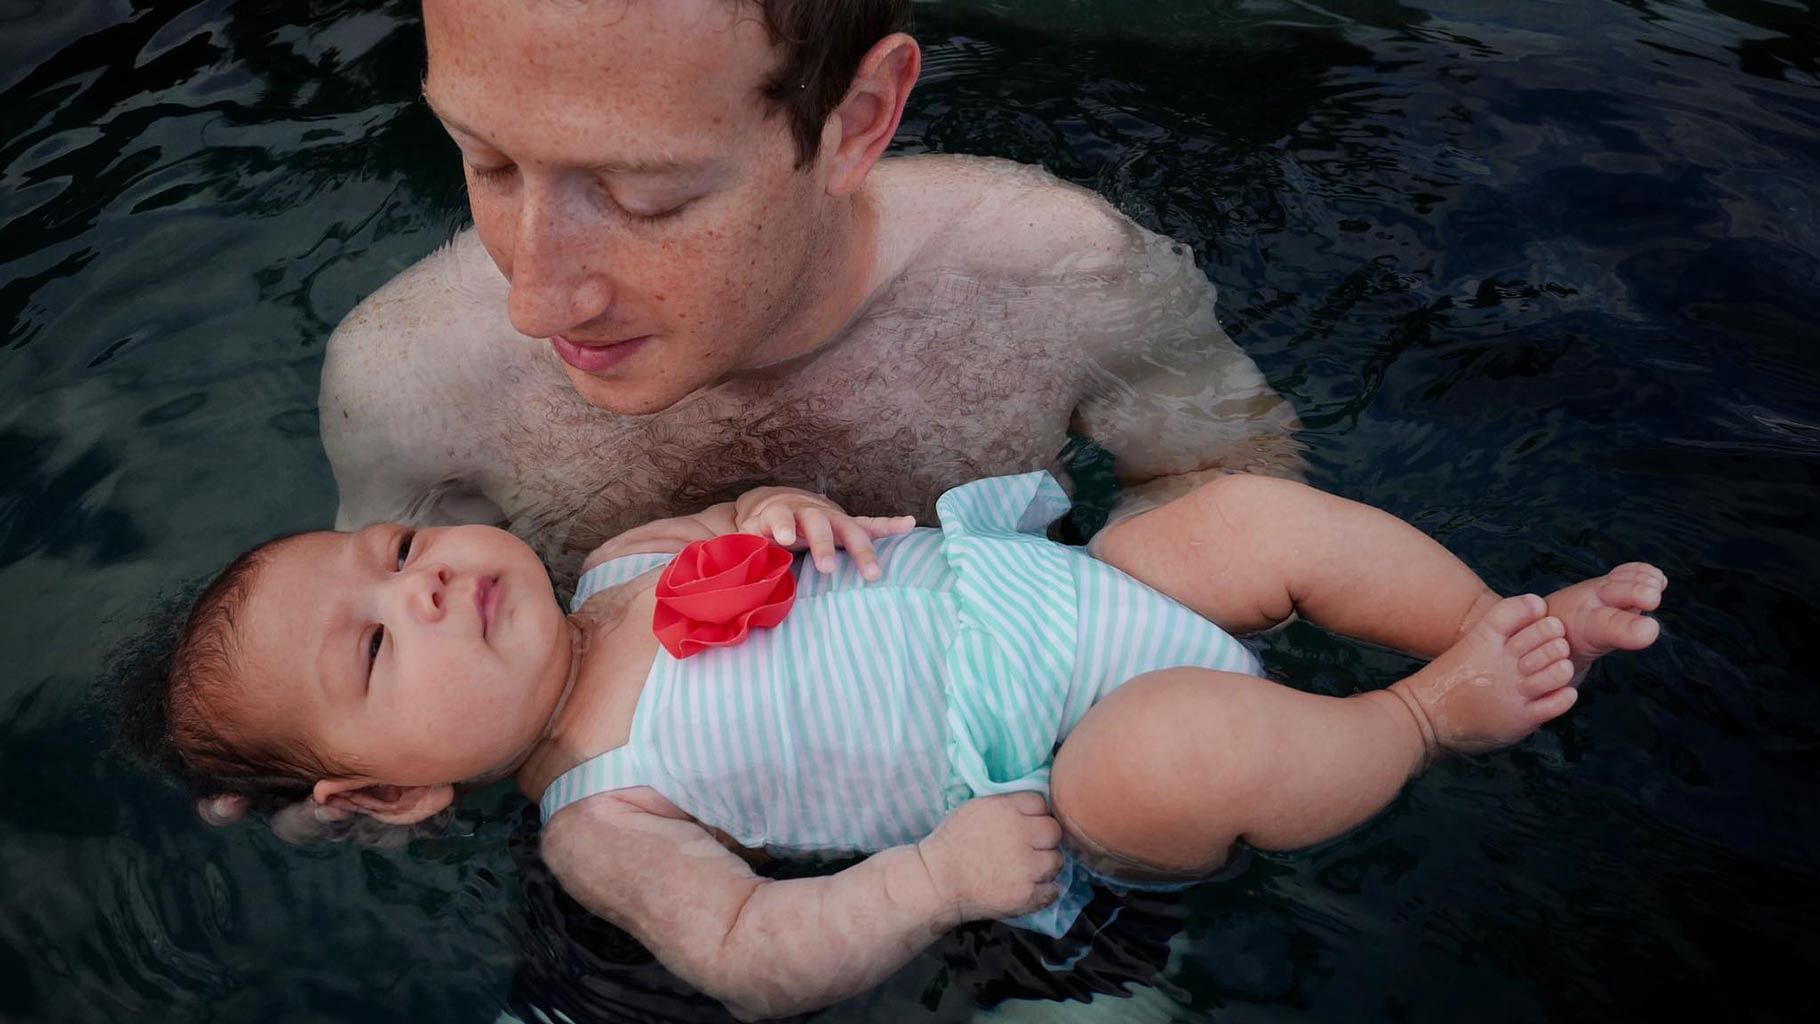 Facebook founder Mark Zuckerberg with two-month-old Max. (Photo Courtesy: <a href="https://www.facebook.com/photo.php?fbid=10102614874143051&amp;set=a.529237706231.2034669.4&amp;type=3&amp;theater">Facebook Page of Mark Zuckerberg</a>)